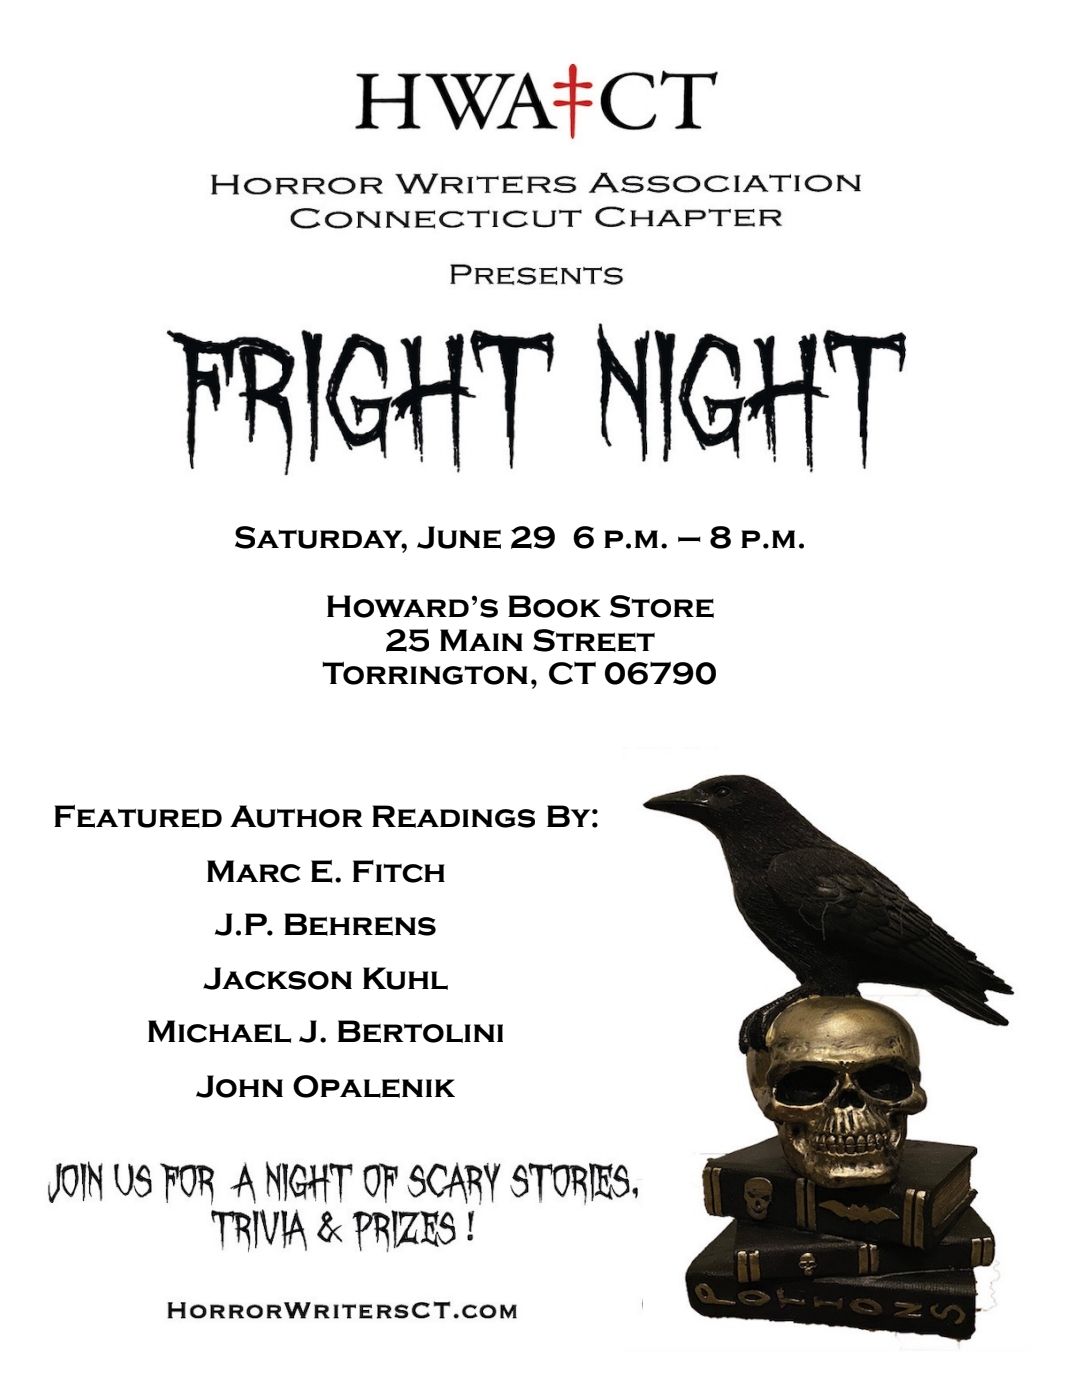 Horror Writers Association Connecticut Chapter presents: FRIGHT NIGHT